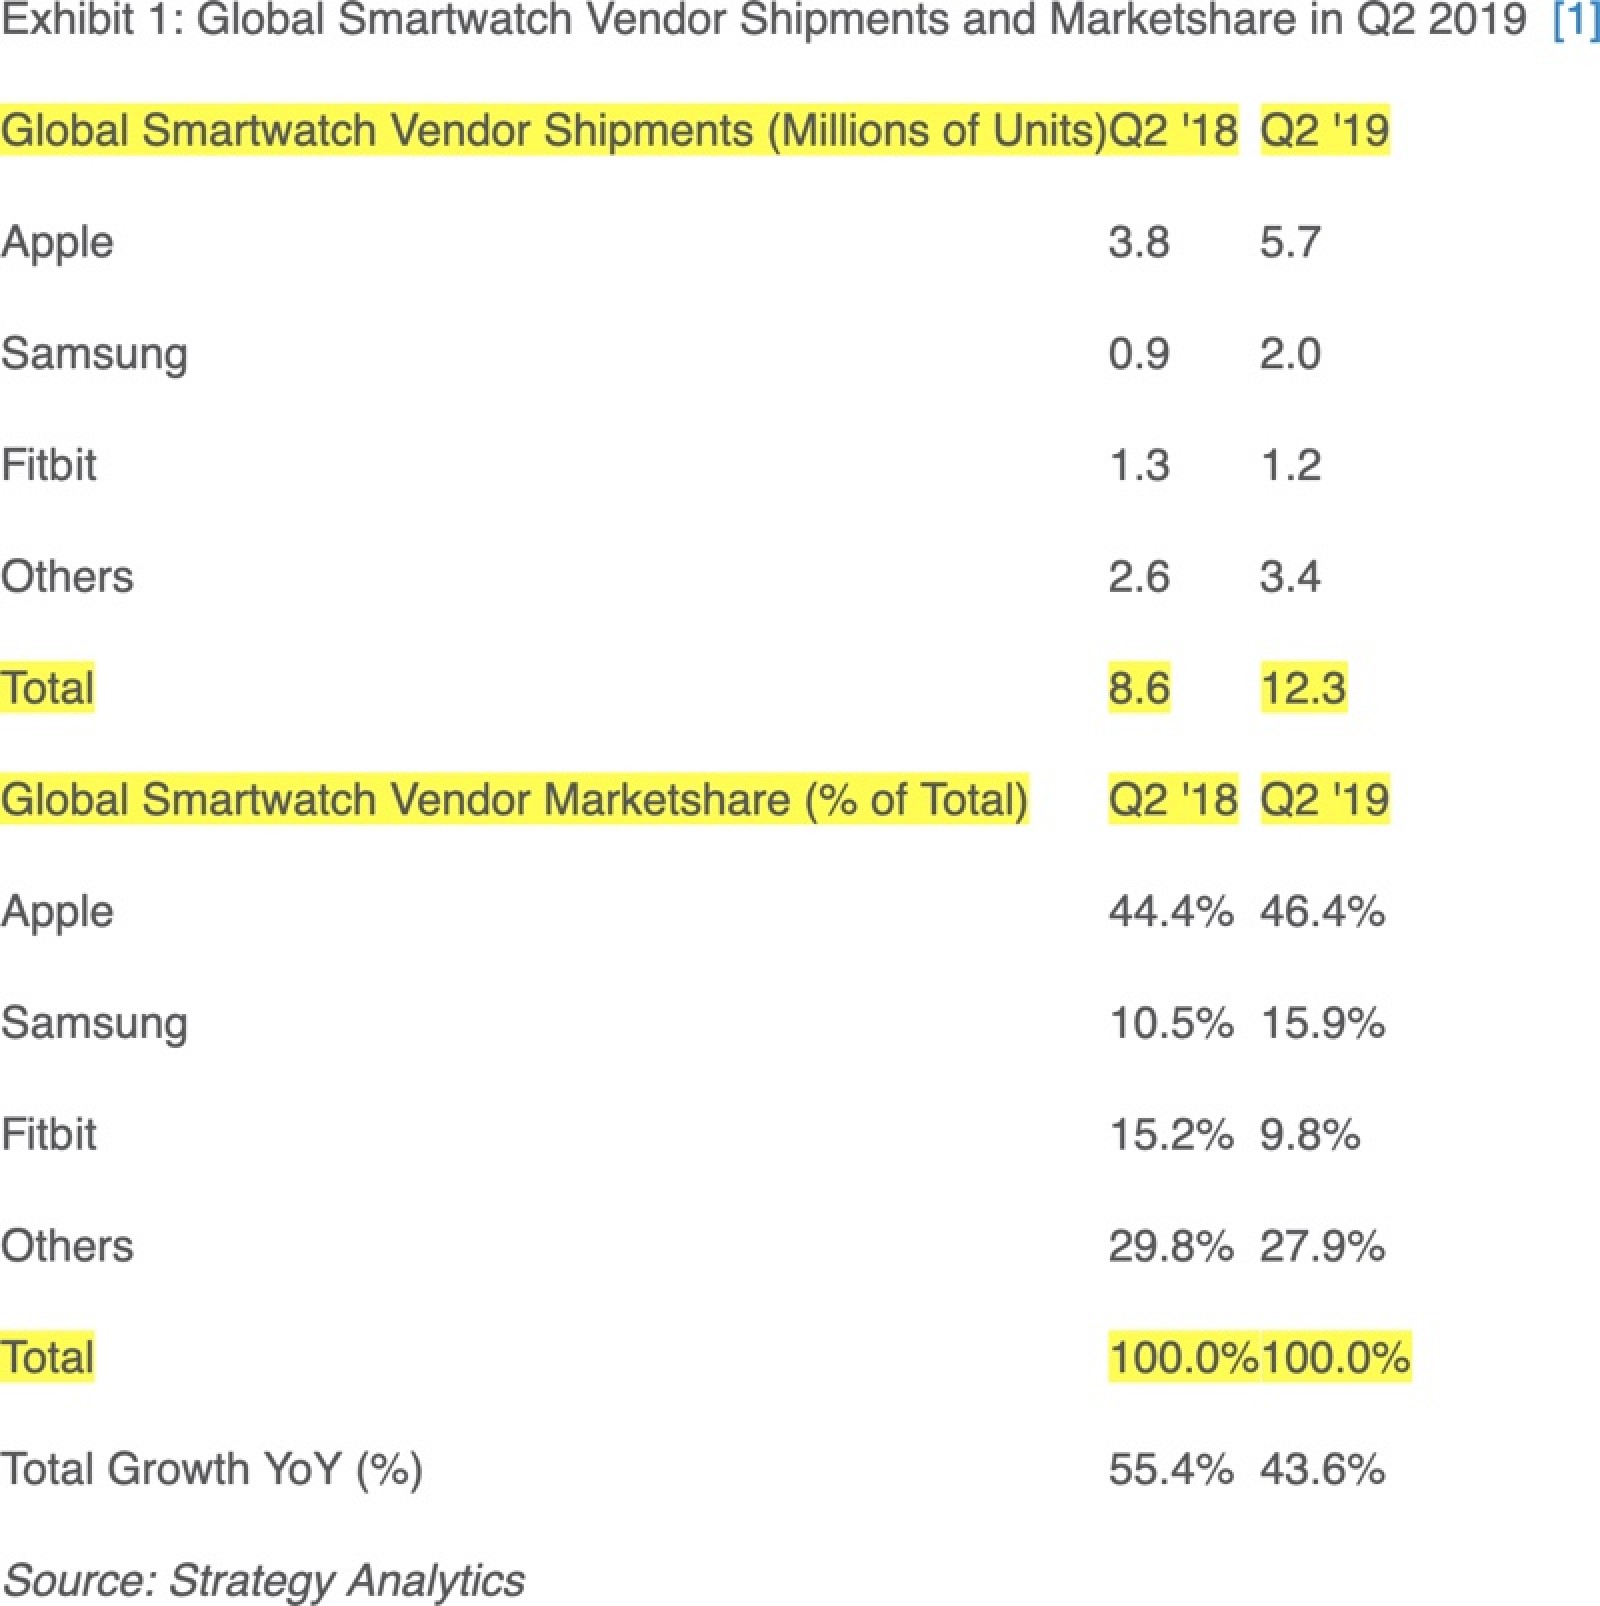 Apple Watch Was Number One Smart Watch in Q2 2019 With an Estimated 5.7M Units Shipped